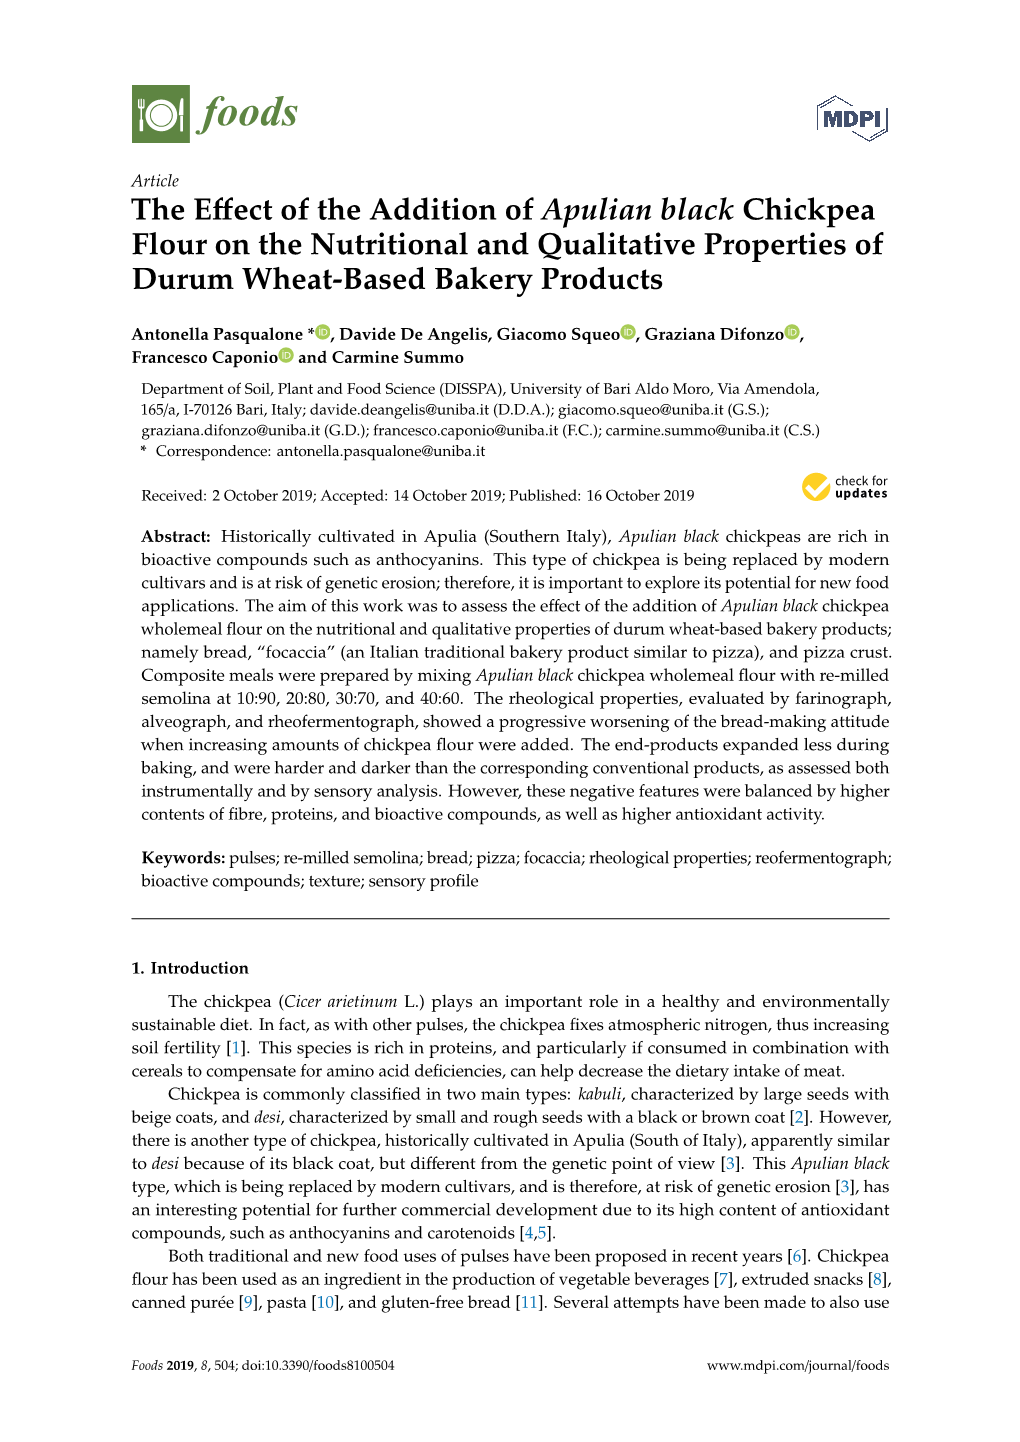 The Effect of the Addition of Apulian Black Chickpea Flour on the Nutritional and Qualitative Properties of Durum Wheat-Based Bakery Products